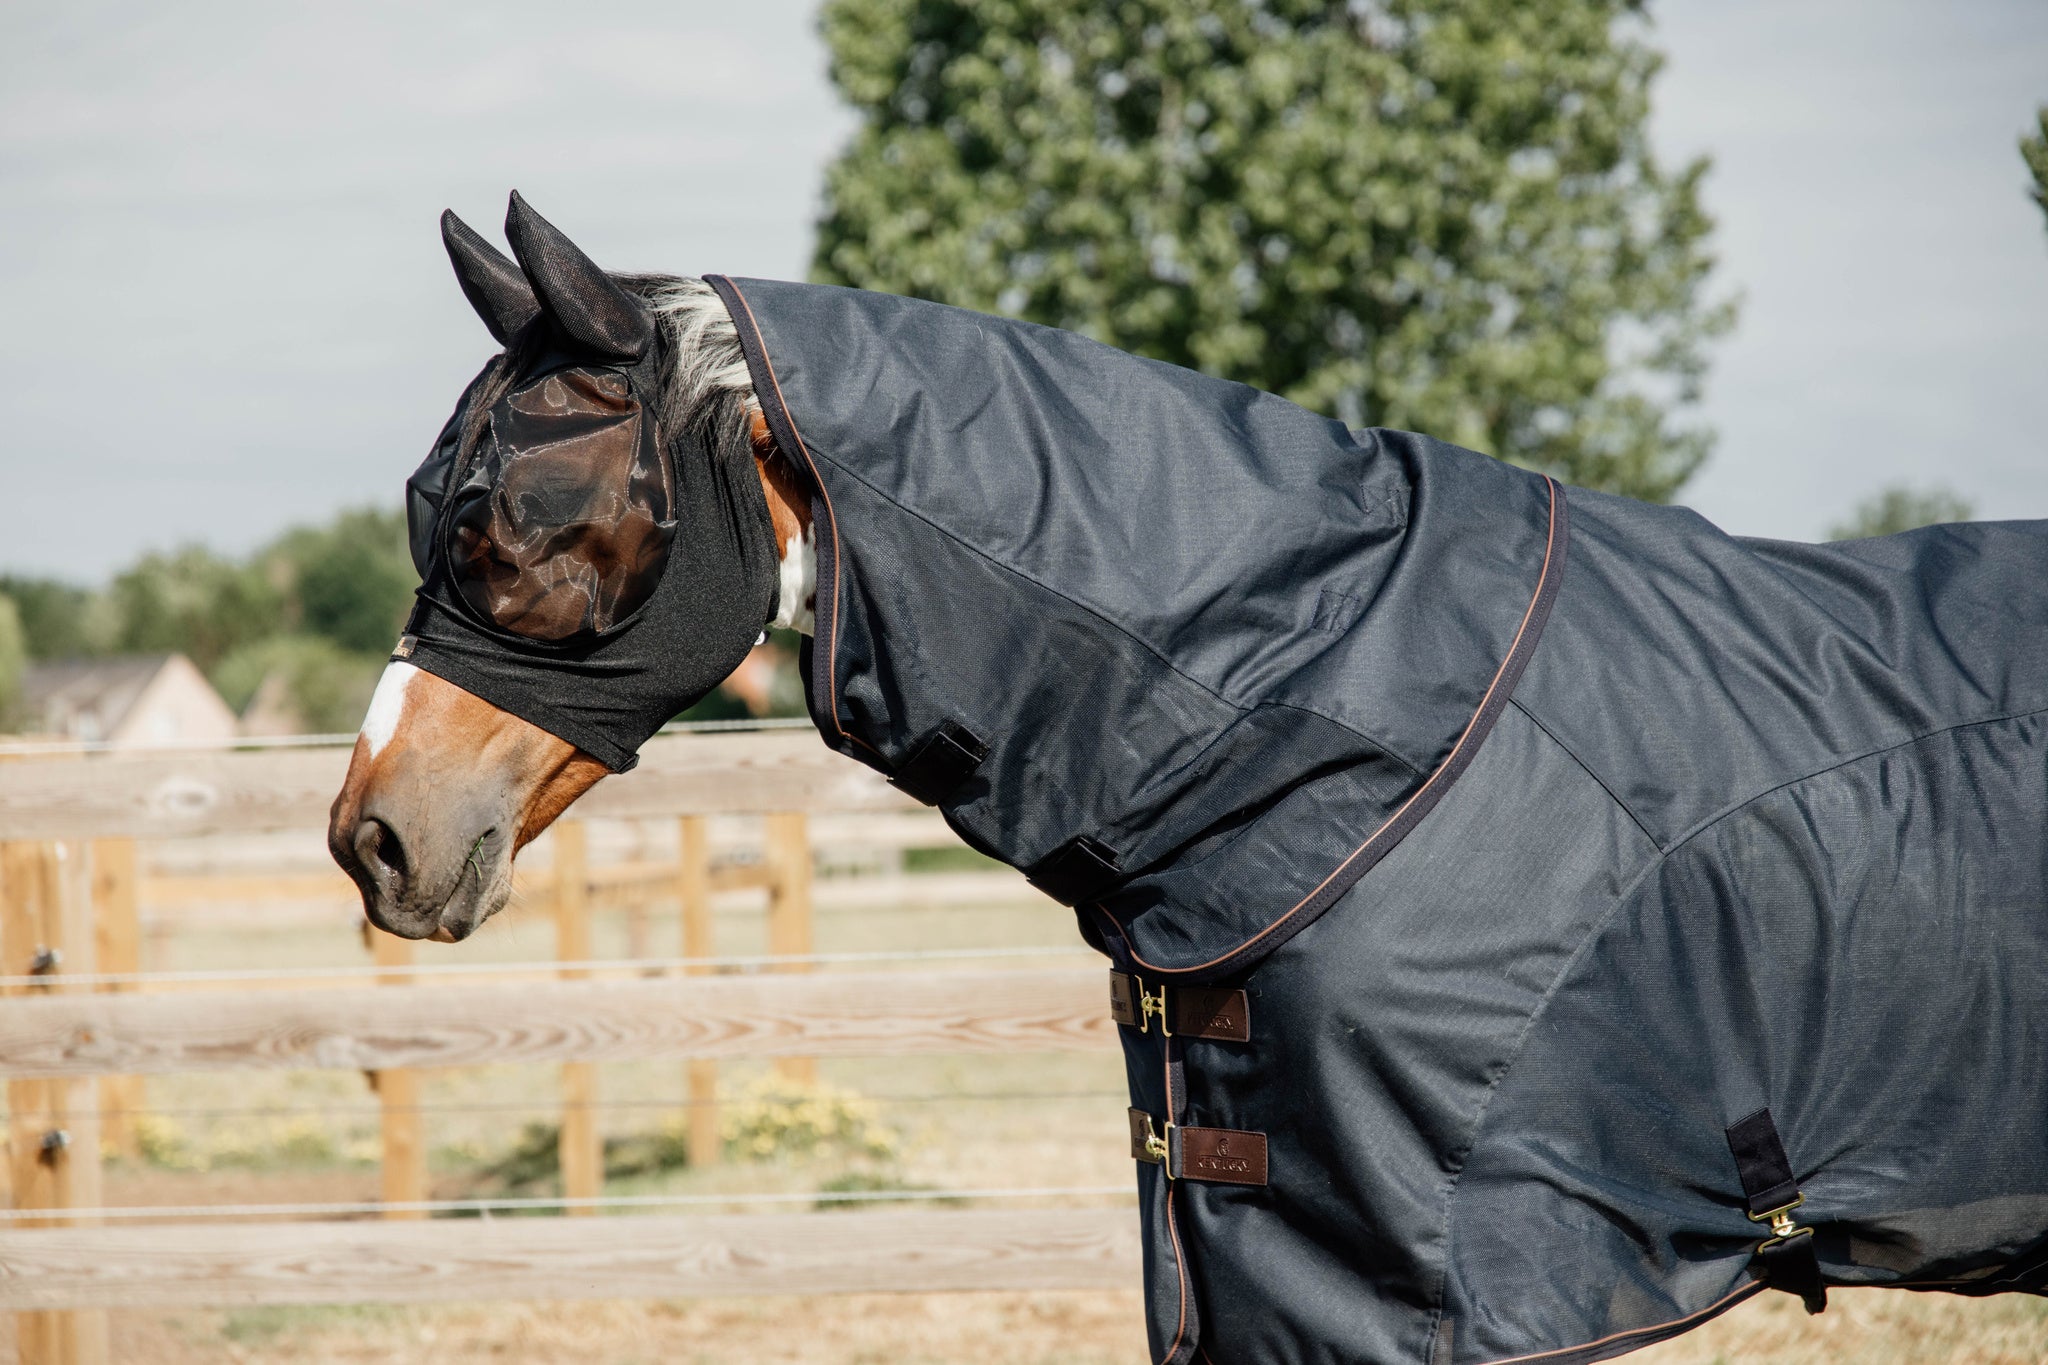 The Waterproof combo fly rug classic protects your horse from flies and rain. The rug is therefore perfect for rainy, yet warmer days from spring through fall. The combination of materials make the rug extremely breathable, so your horse will be comfortable at all times.